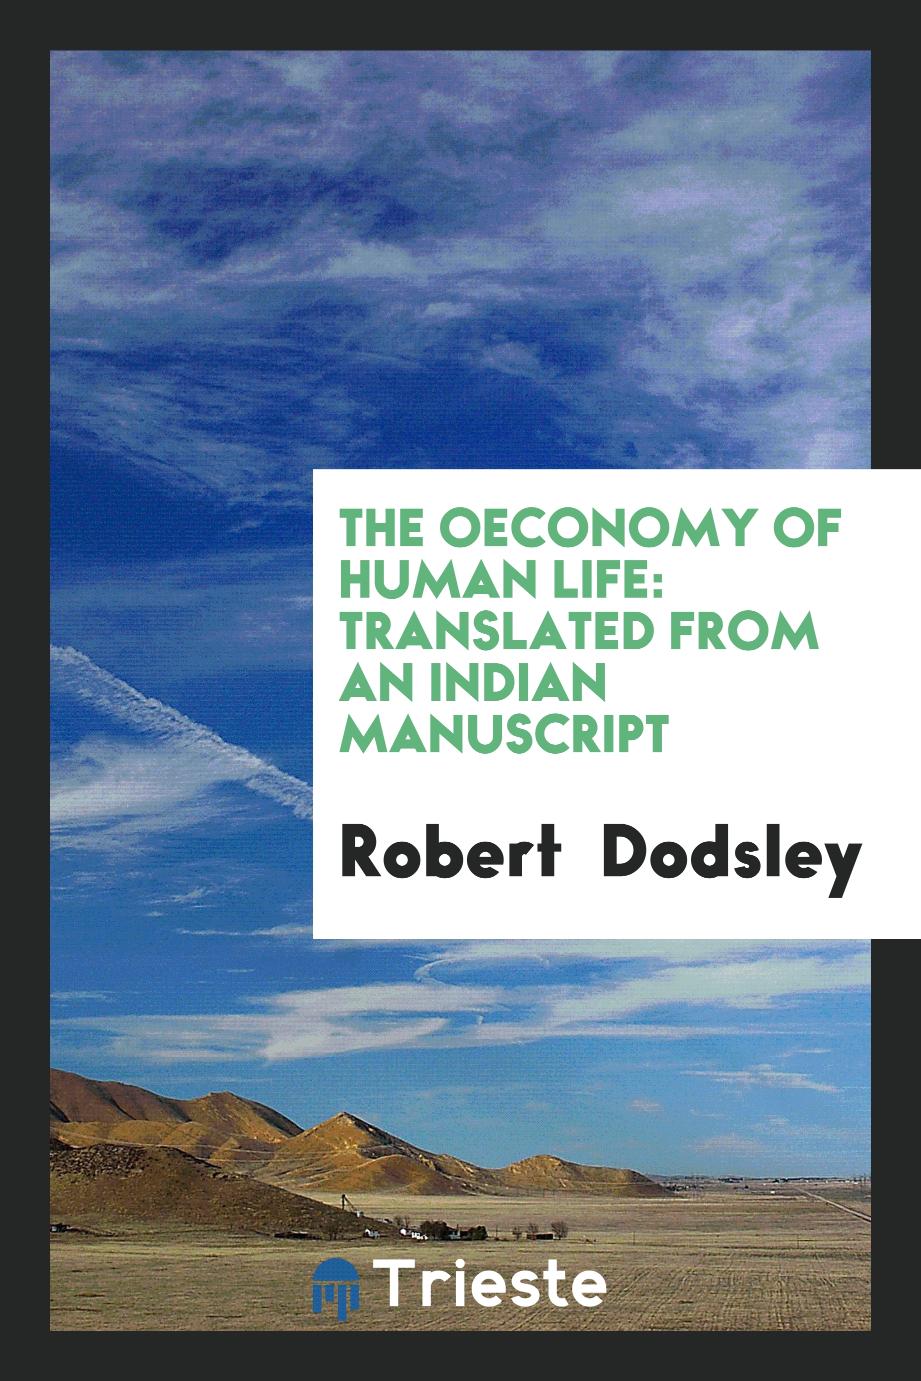 The Oeconomy of Human Life: Translated from an Indian Manuscript